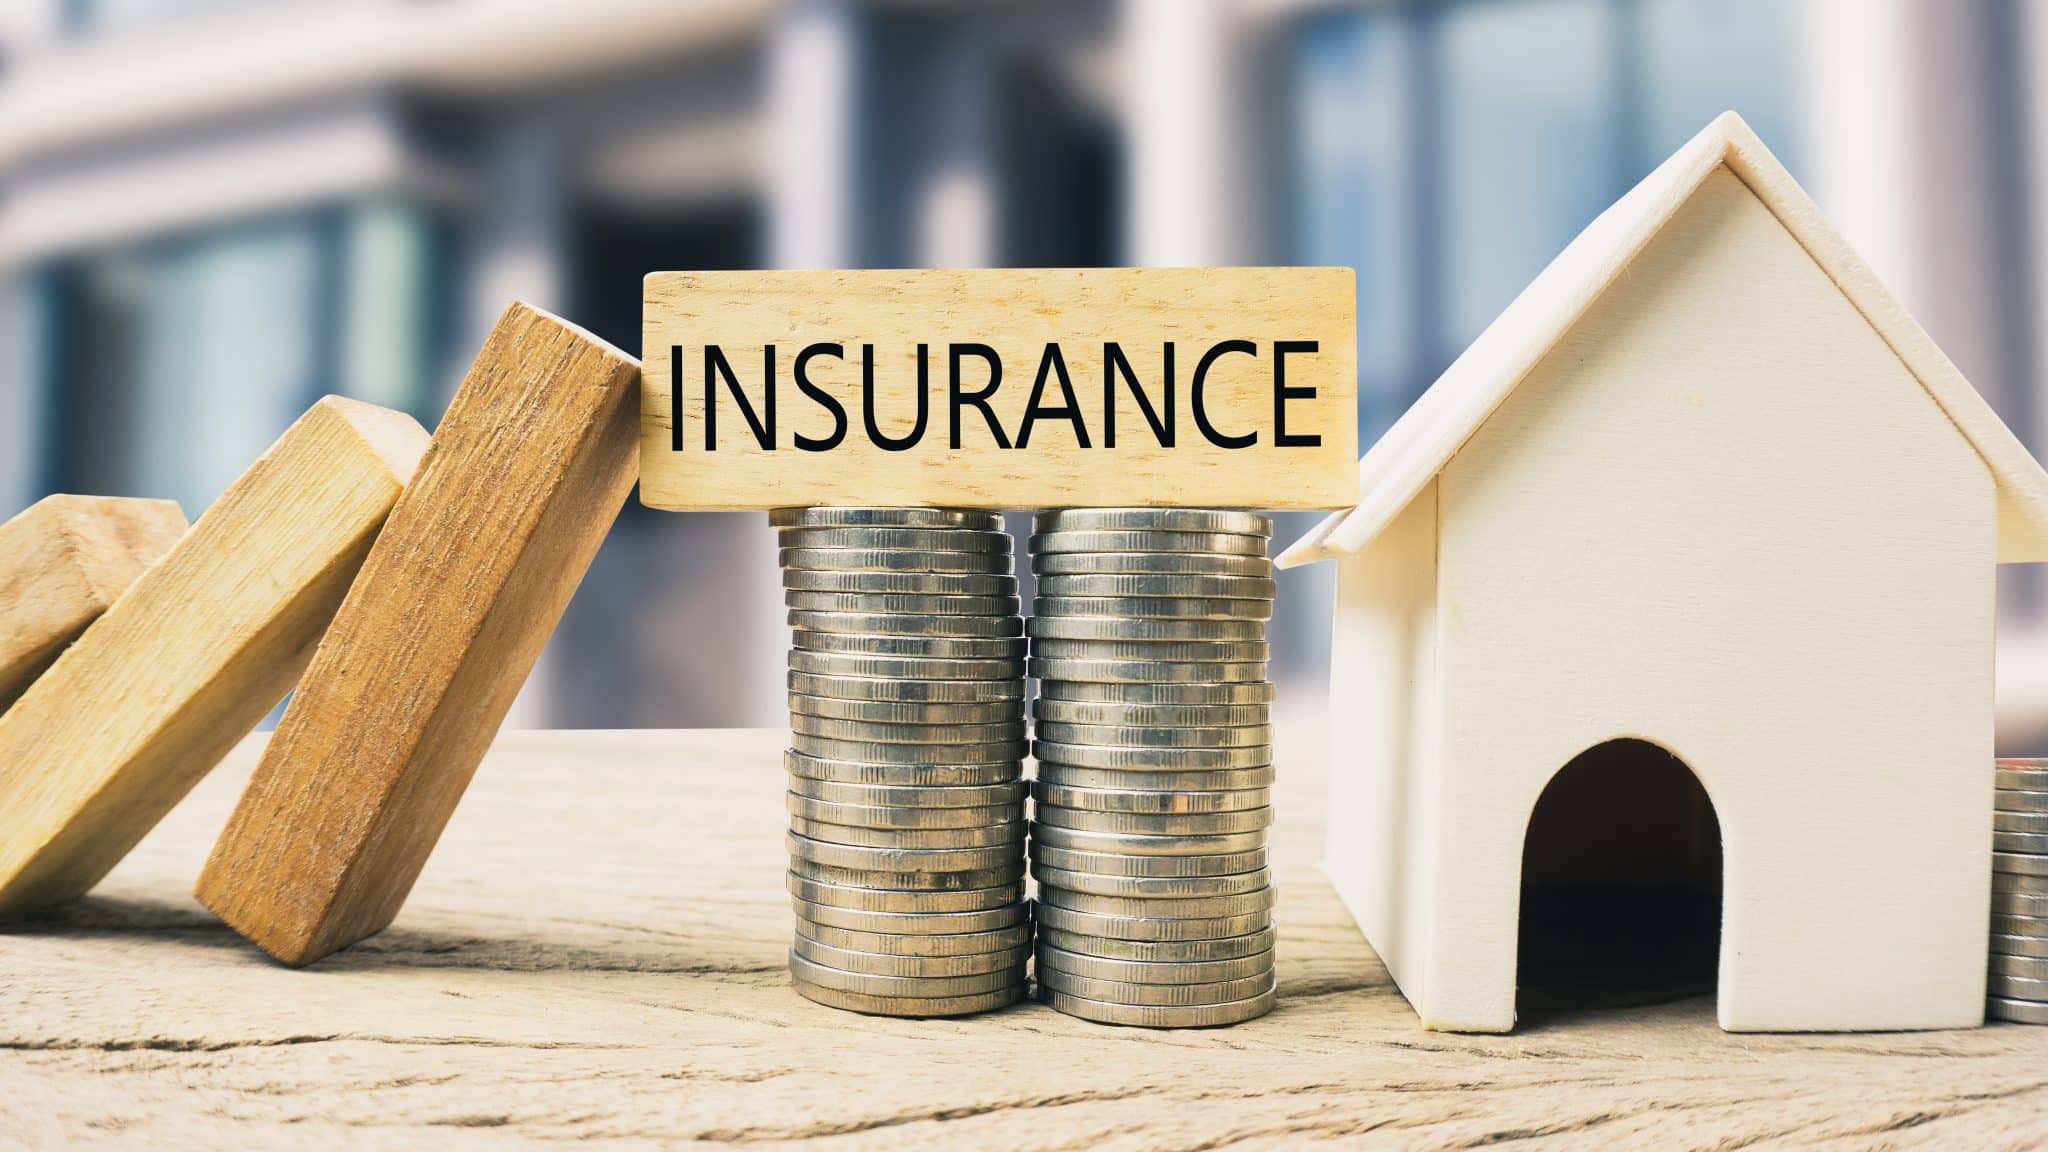 home-insurance-coverage-for-plumbing-picture-of-toy-house-and-a-stack-of-coins